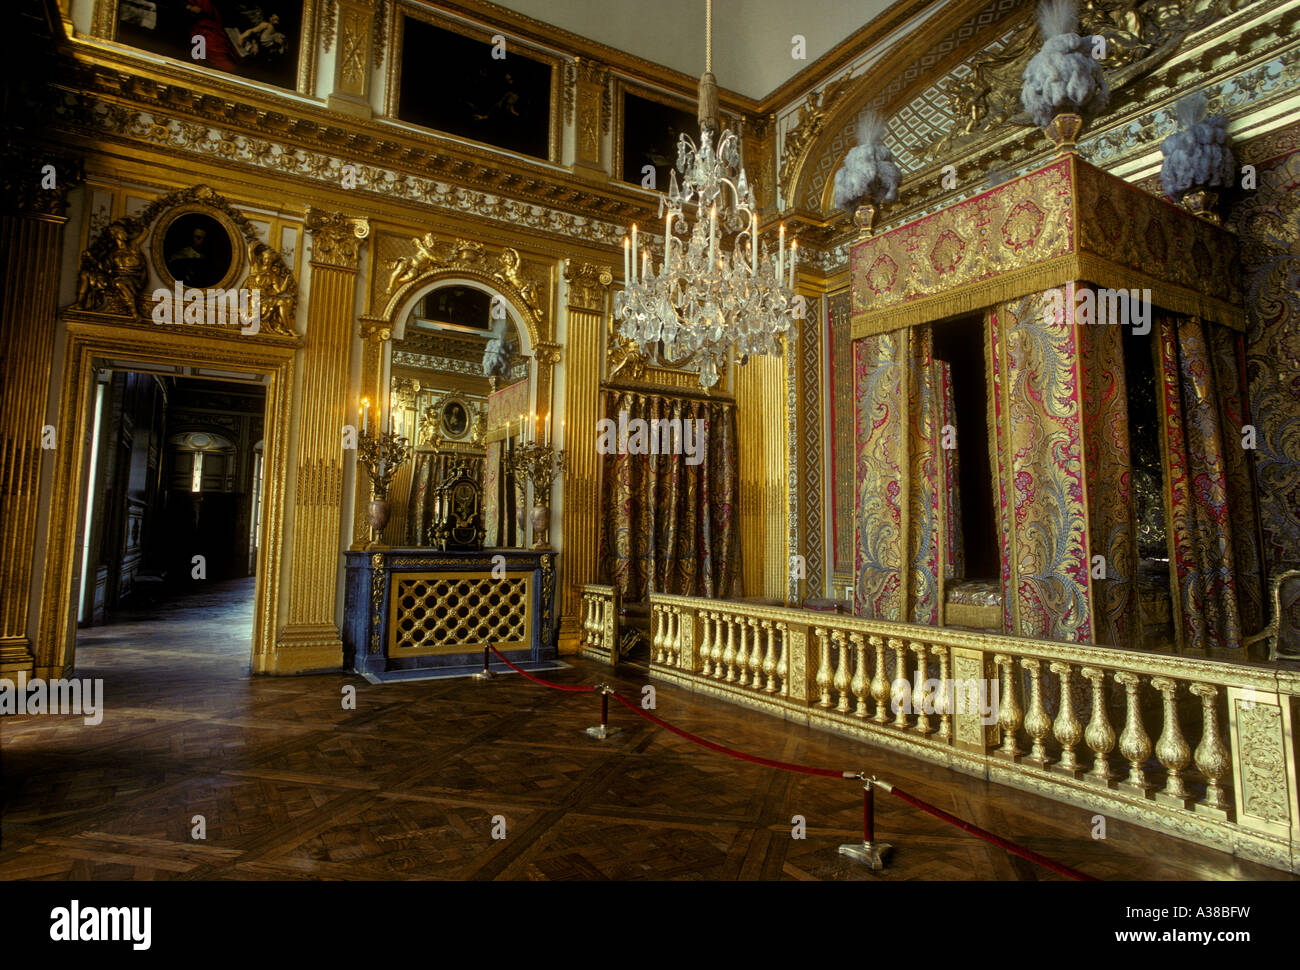 Kings Bedchamber, Chambre du Roi, Palace of Versailles, city of Versailles, Ile-de-France, France, Europe Stock Photo